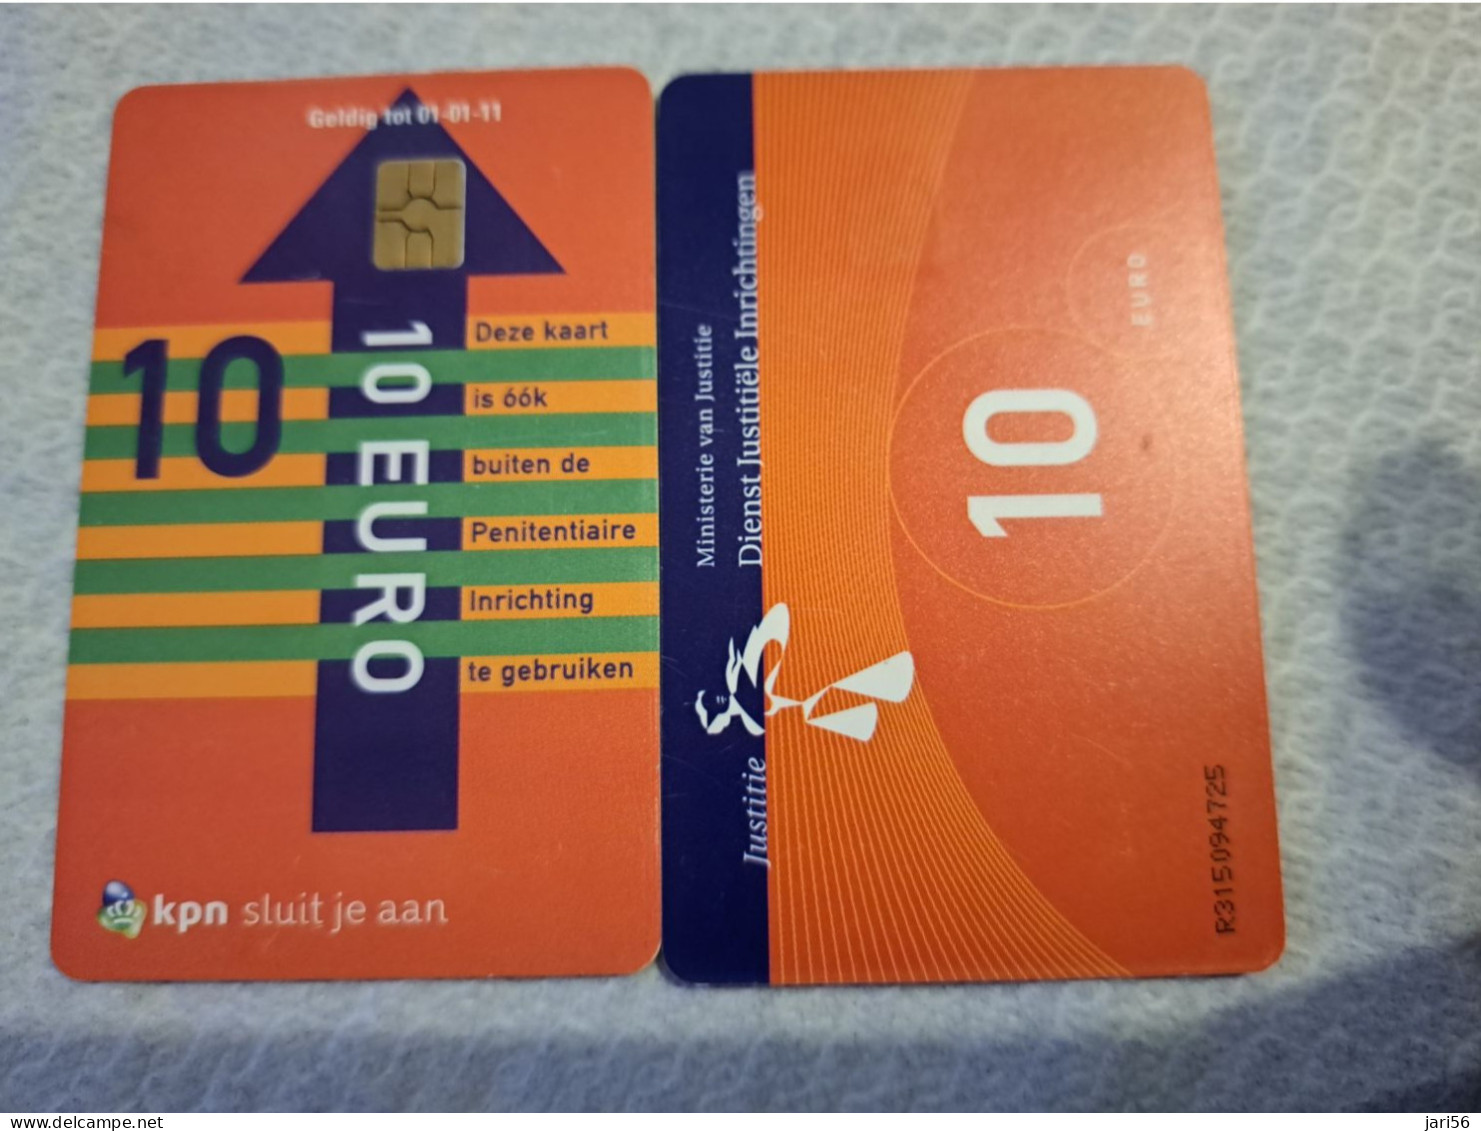 NETHERLANDS   € 10,-   / USED  / DATE  01-01-11  JUSTITIE/PRISON CARD  CHIP CARD/ USED   ** 16164** - [3] Sim Cards, Prepaid & Refills